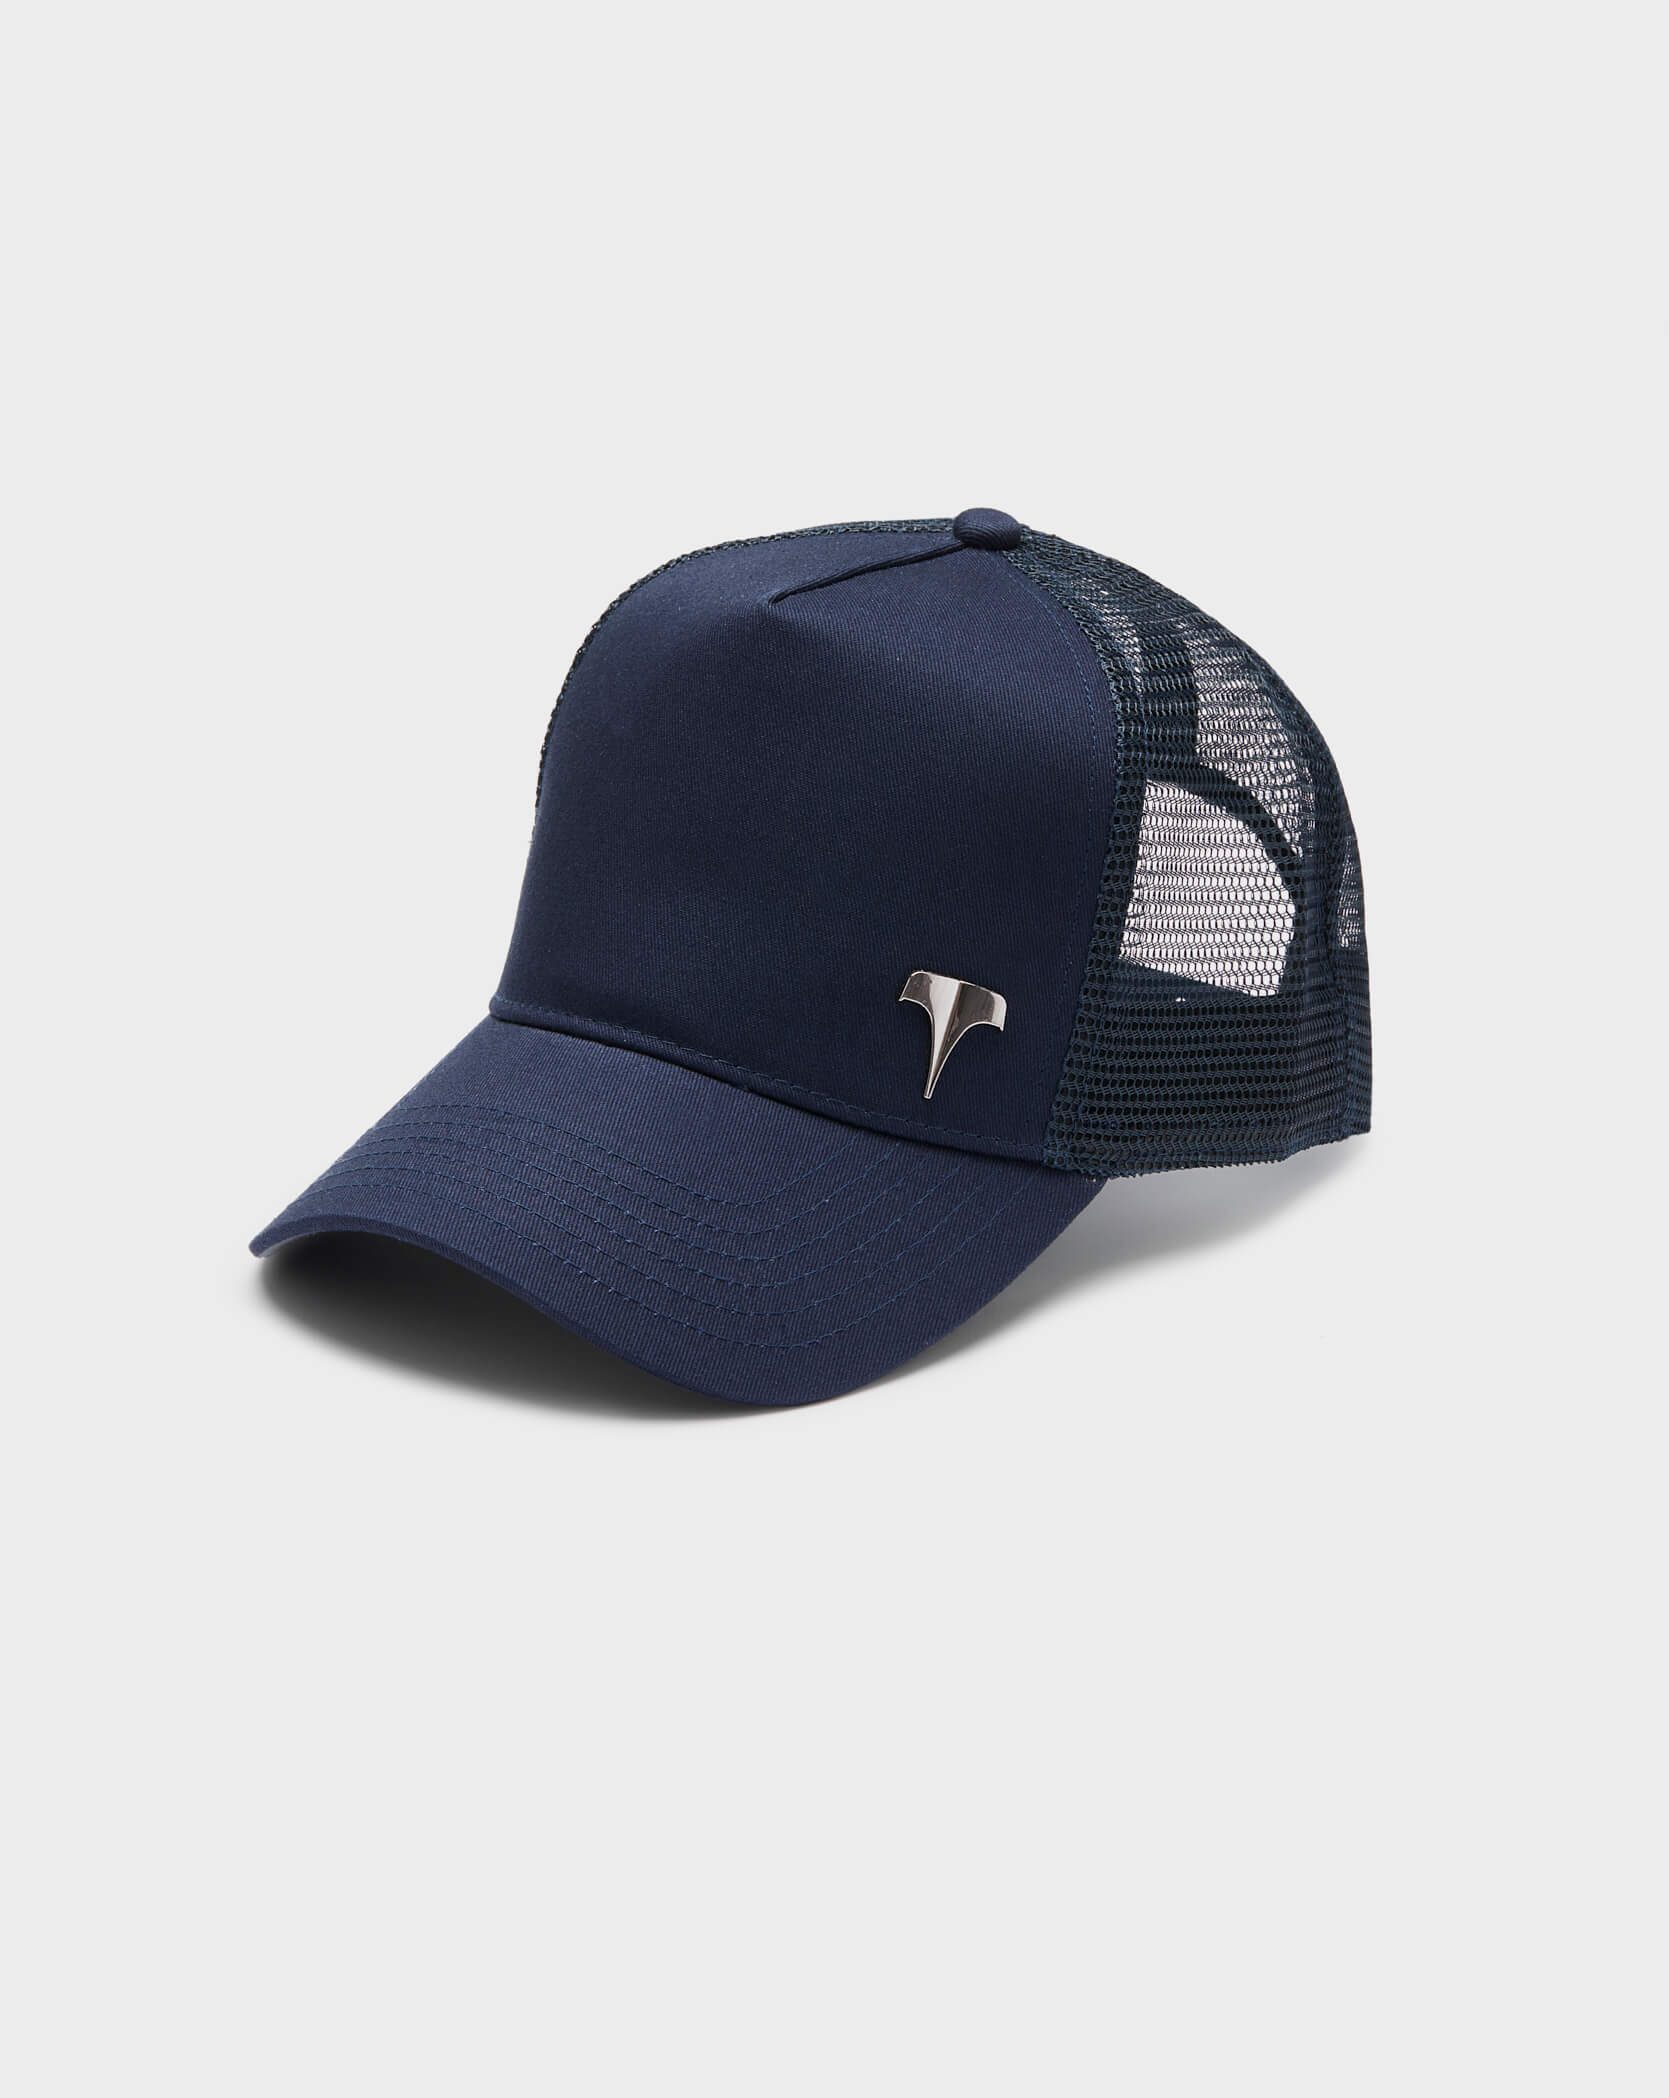 Twinzz navy trucker cap with small silver logo